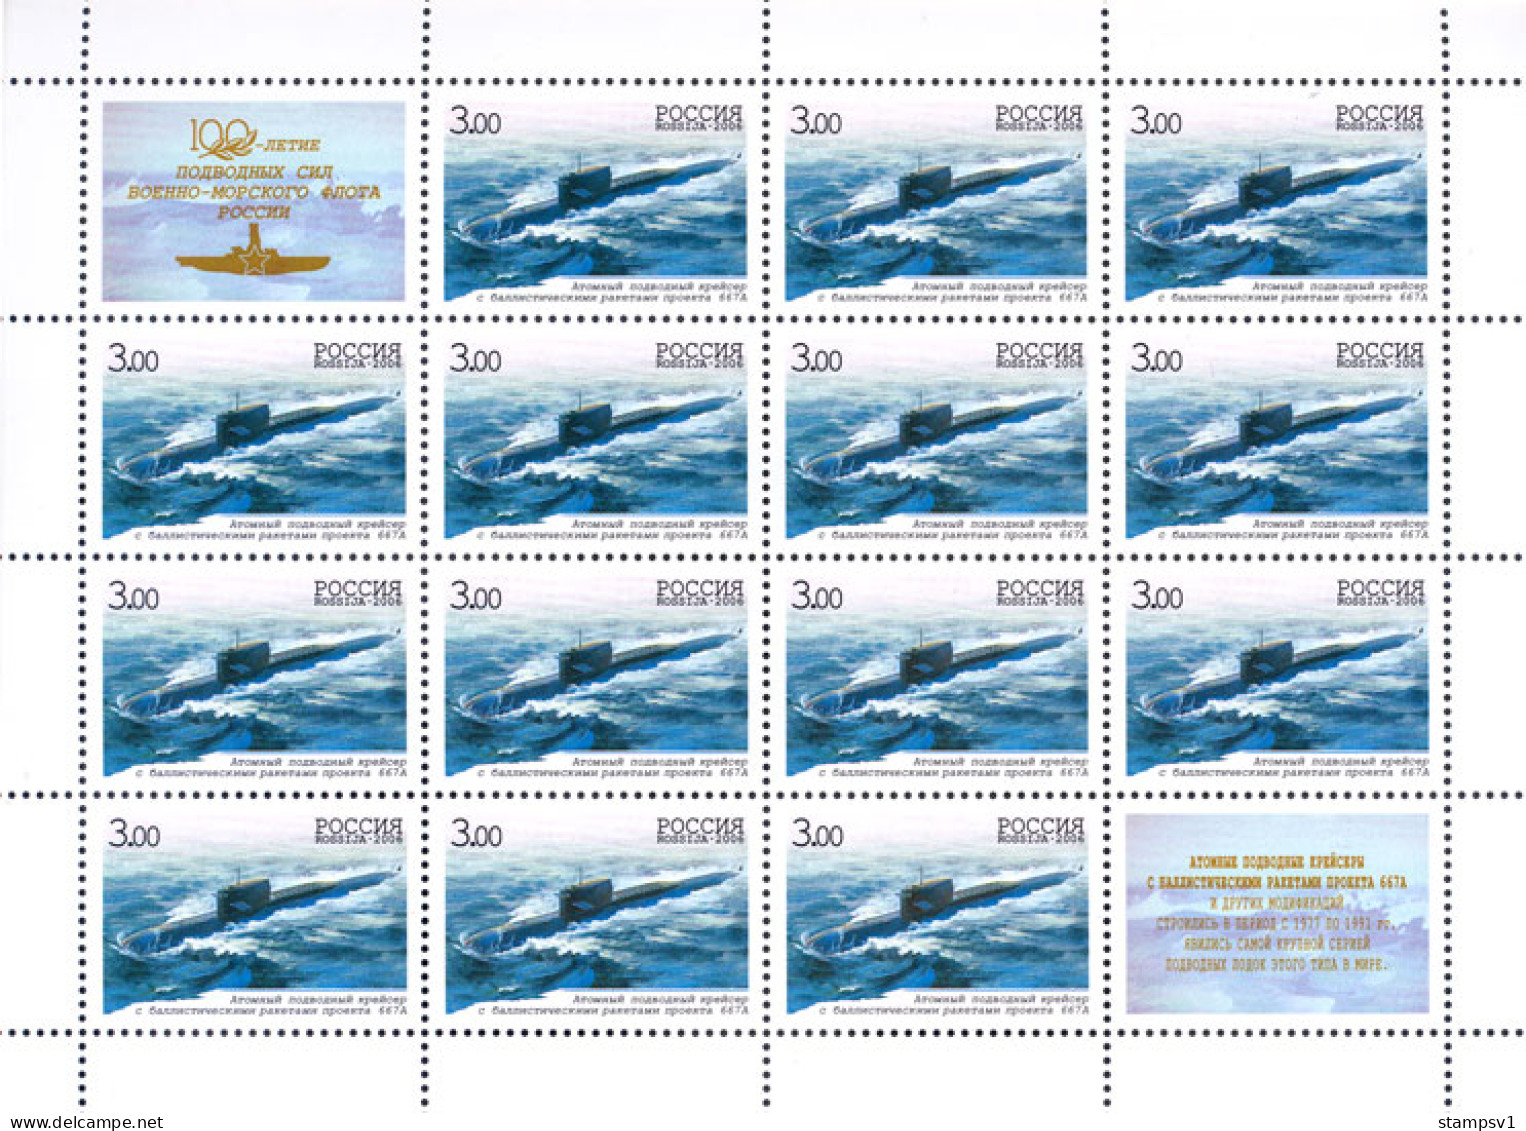 Russia 2006 The 100th Anniversary Of The Russian Navy Underwater Forces. Mi 1311-14 4 Klb - U-Boote